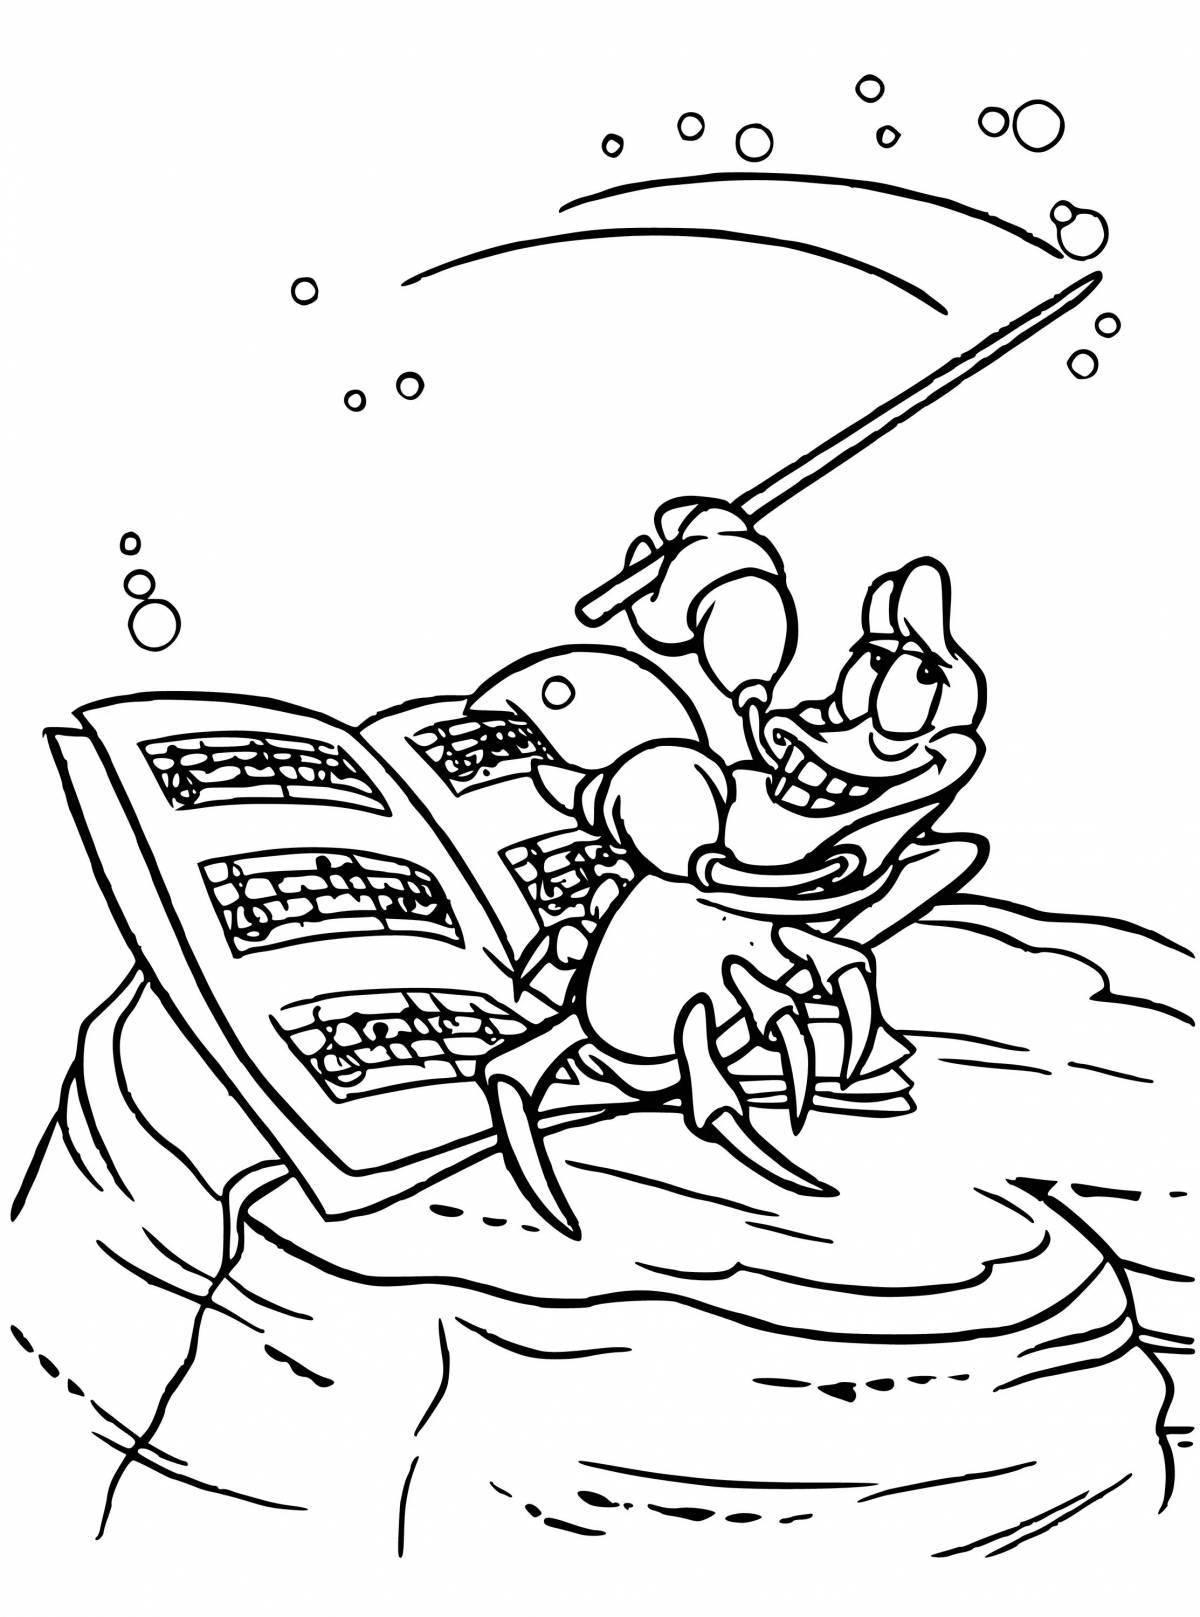 Coloring page joyful conductor for children